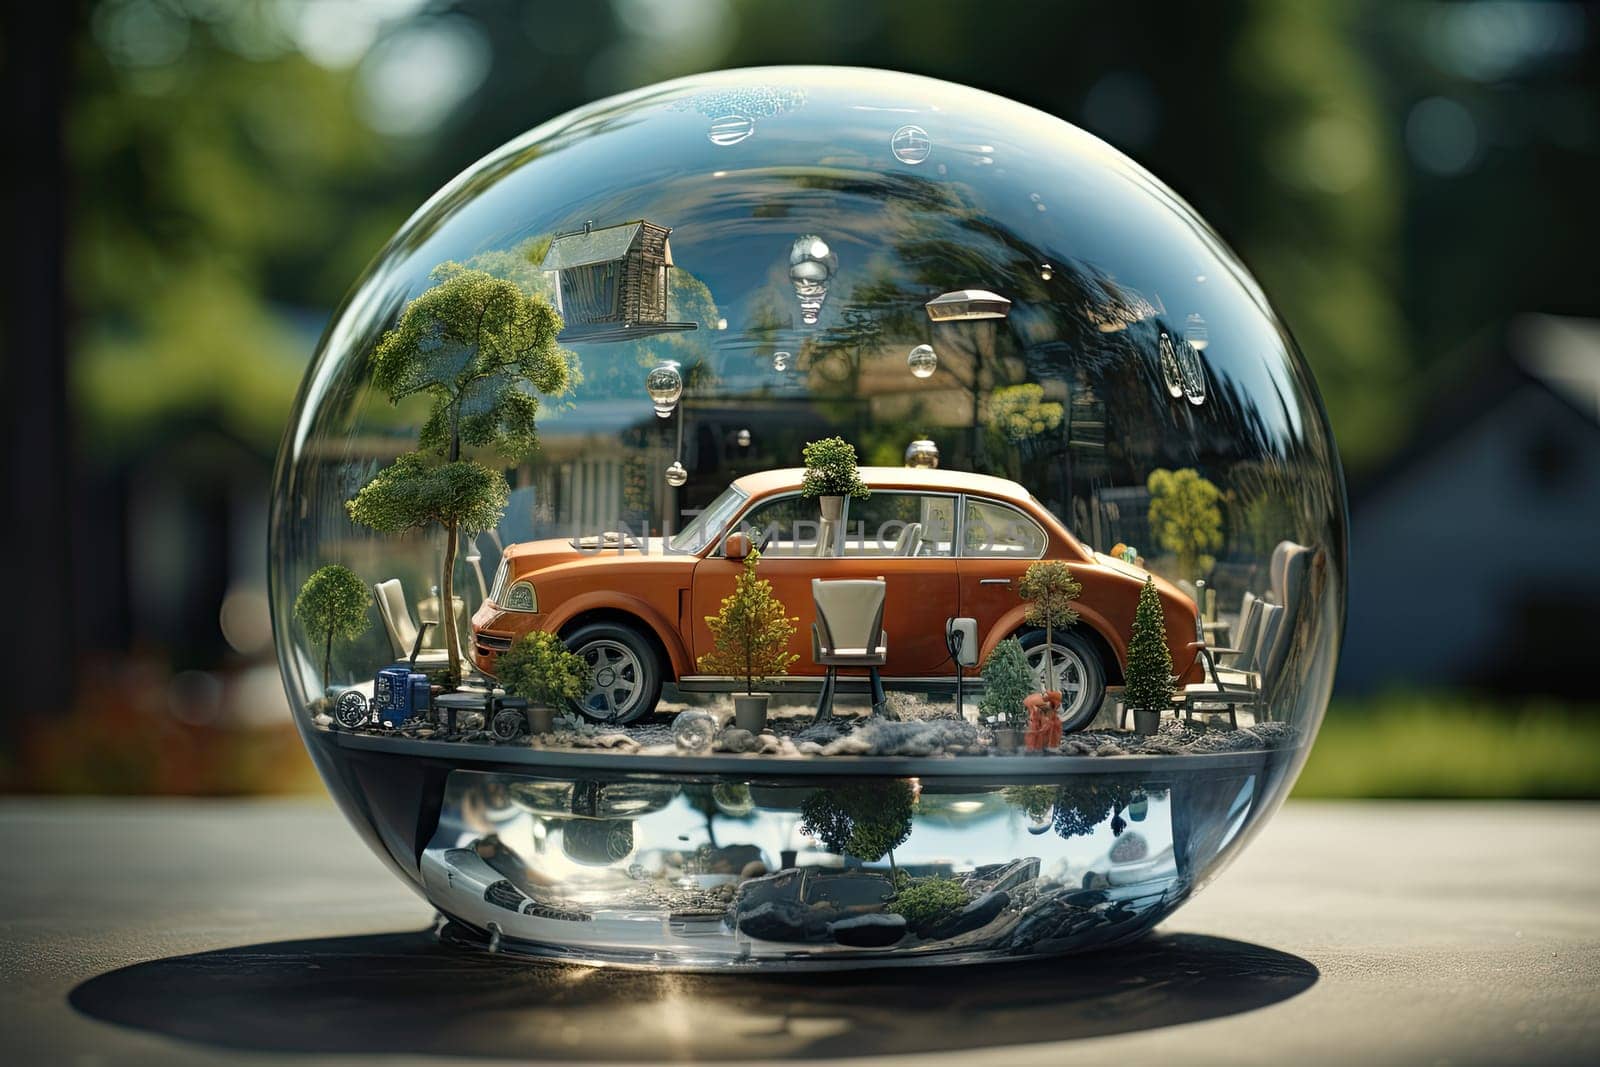 A Vibrant Red Car Captured Inside a Crystal Clear Glass Ball Created With Generative AI Technology